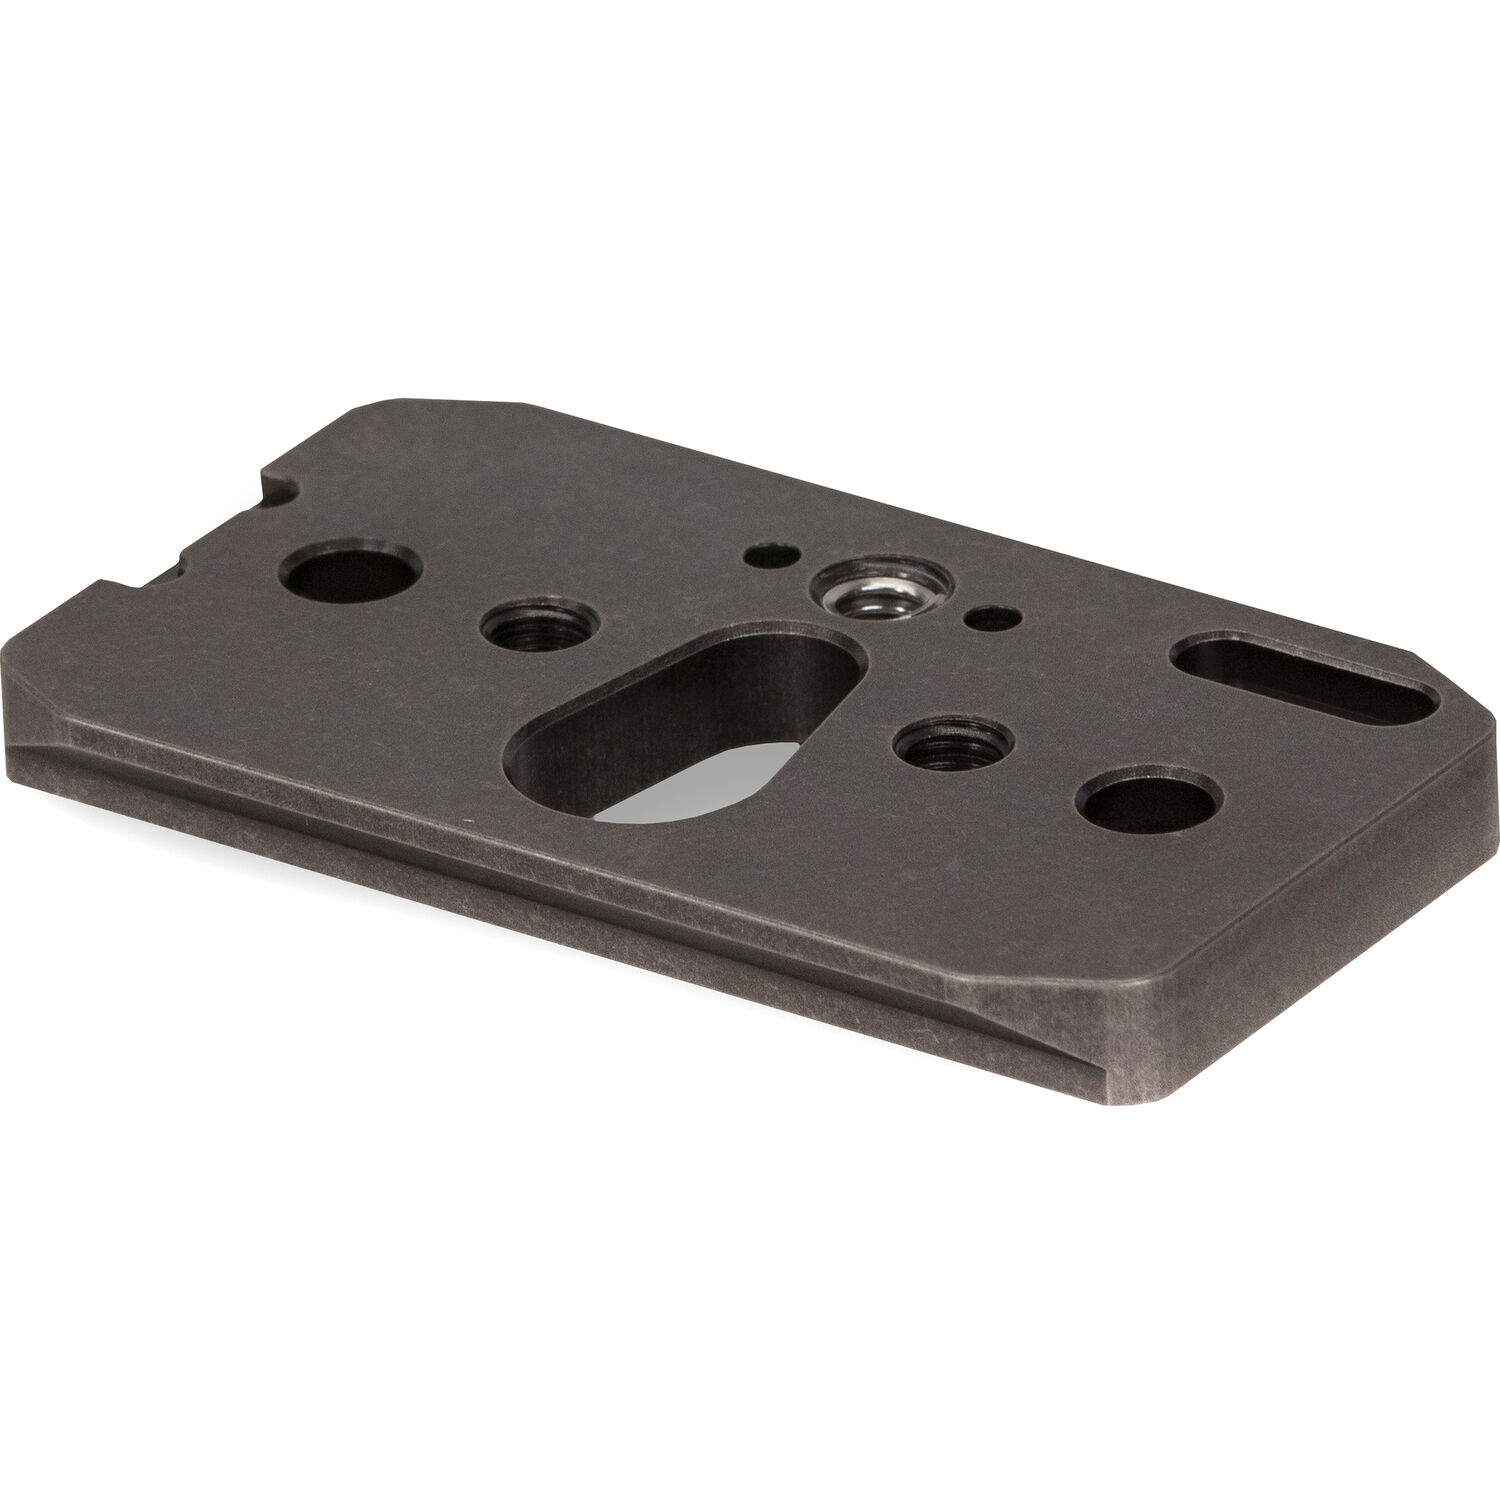 Tilta RED KOMODO Adapter Plate for 15mm LWS Baseplate (Tactical Gray)